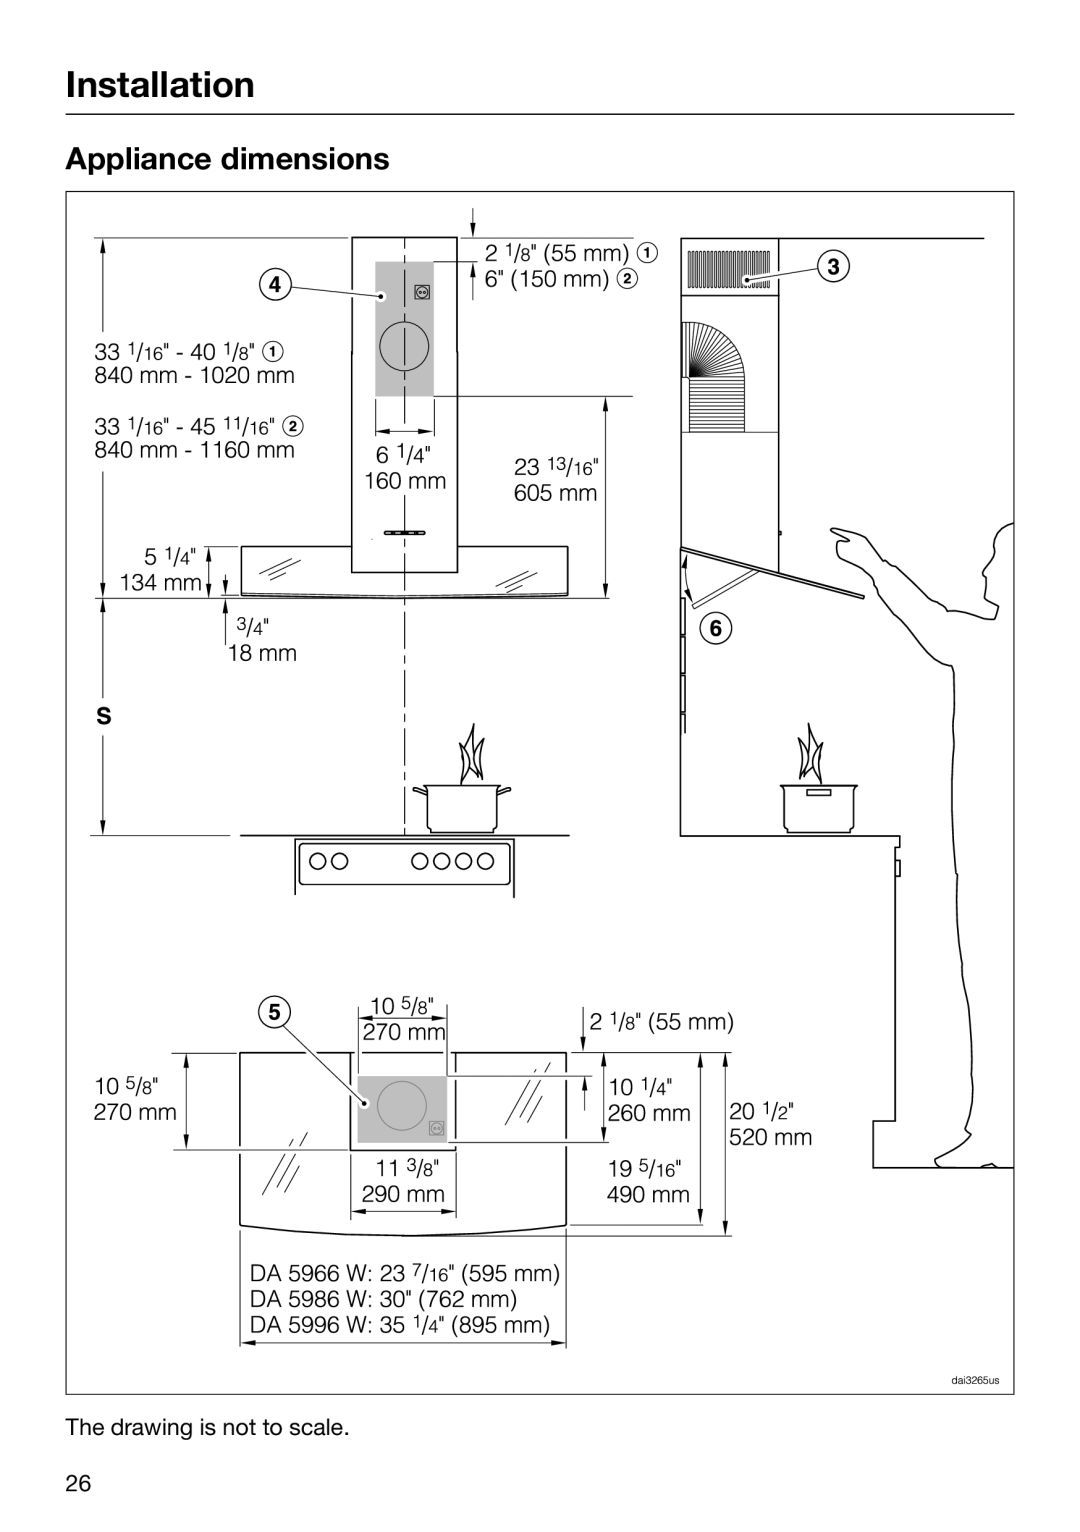 Miele 09 968 280 installation instructions Appliance dimensions, Installation, The drawing is not to scale 